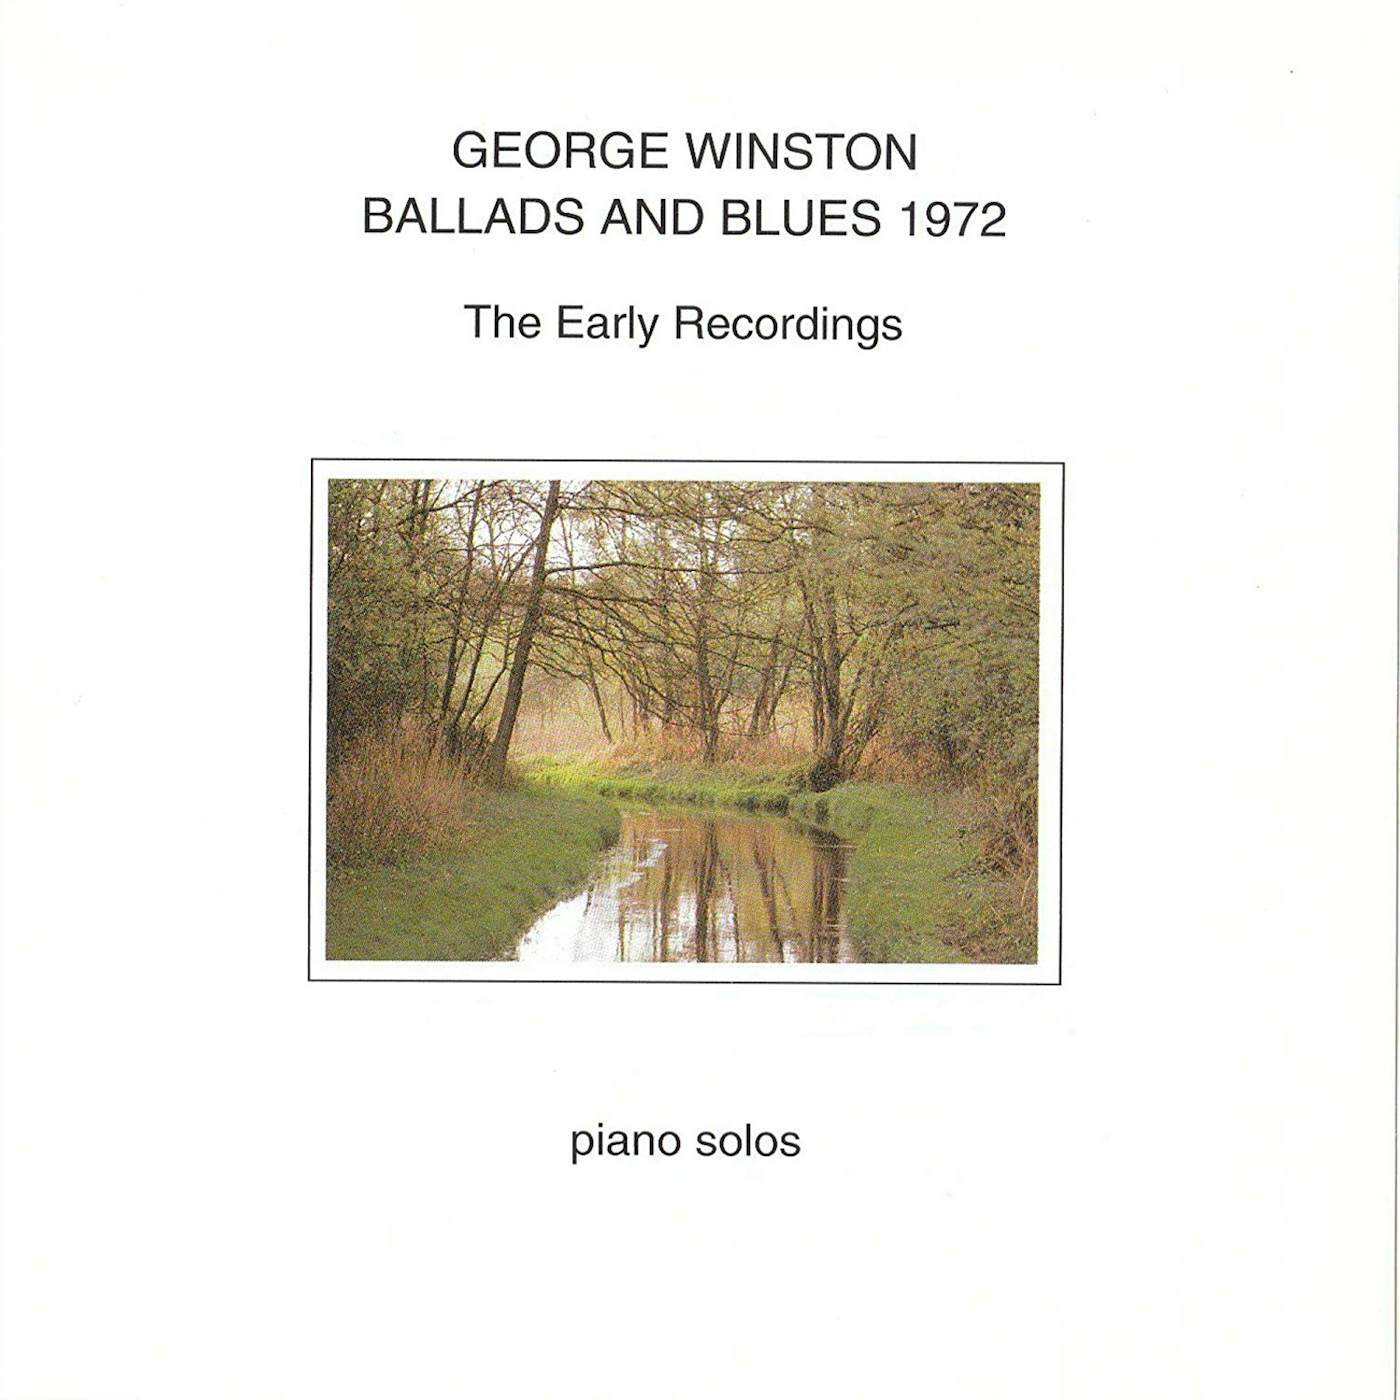 George Winston BALLADS AND BLUES 1972: THE EARLY RECORDINGS CD